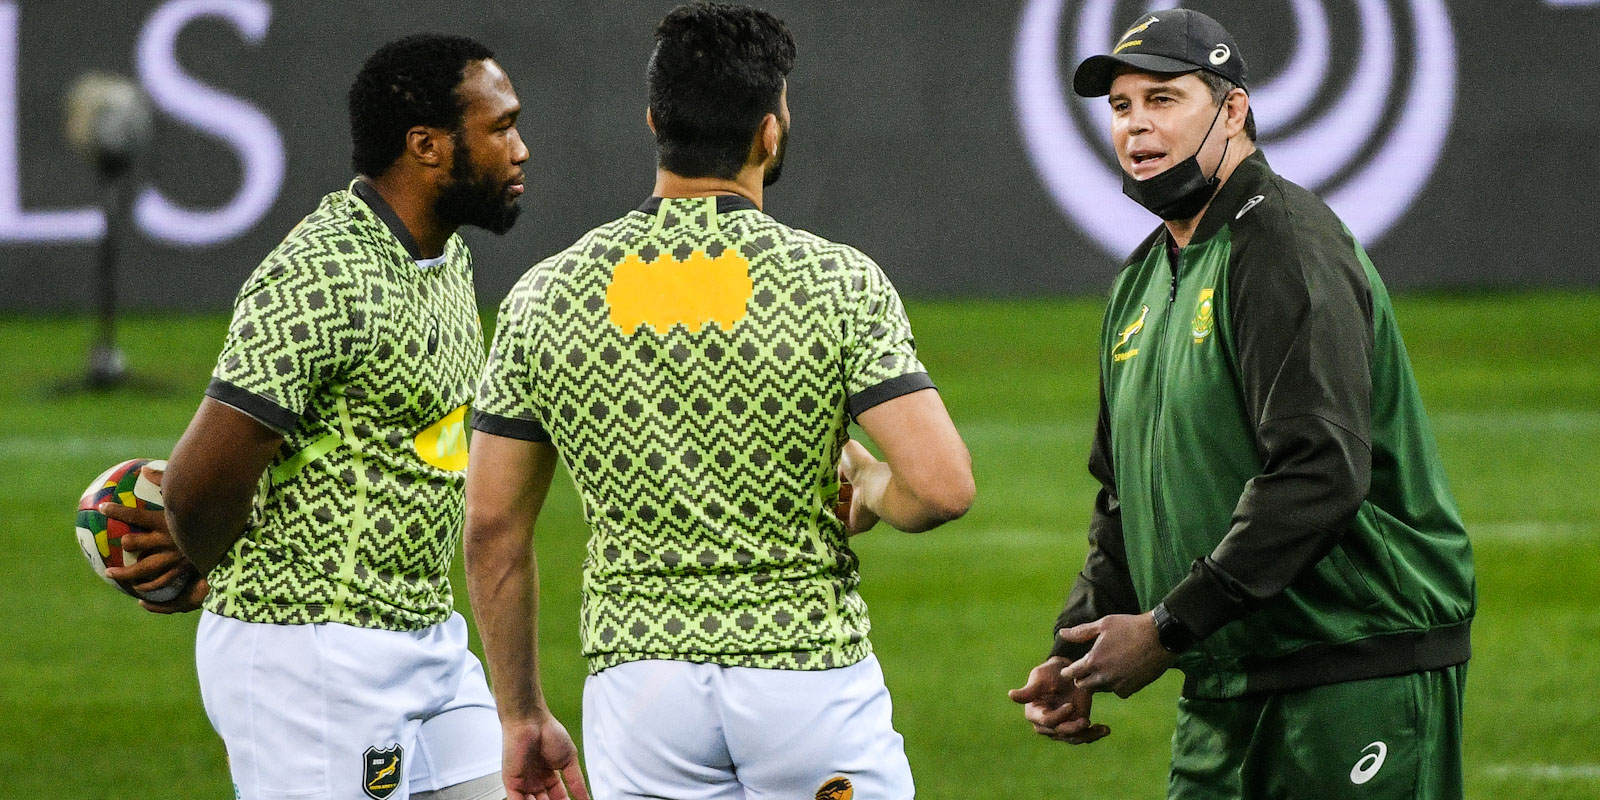 Rassie Erasmus discusses some last-minute plans with Lukhanyo Am and Damian de Allende.